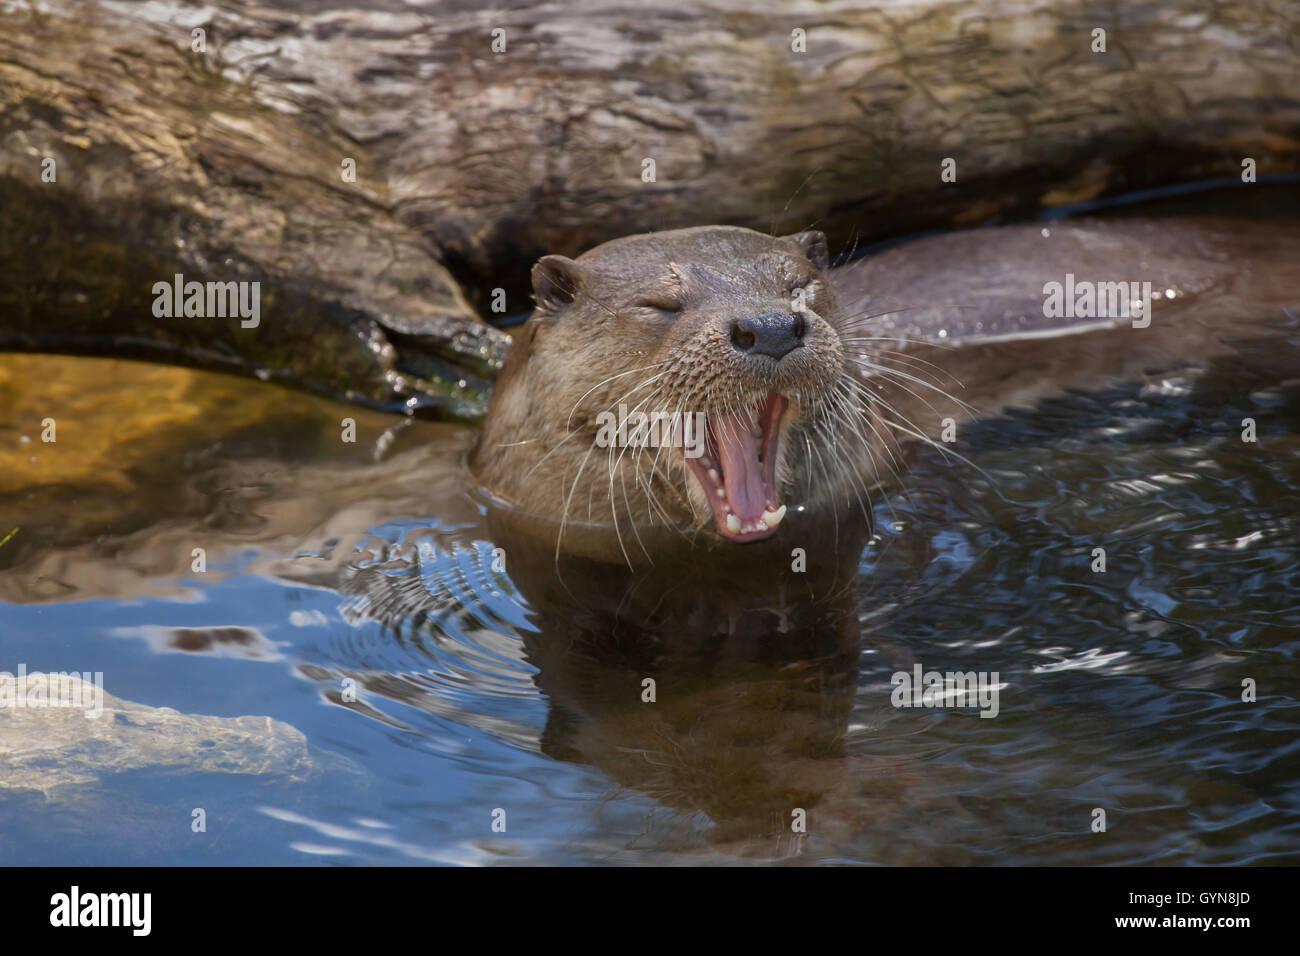 Eurasian otter (Lutra lutra lutra), also known as the common otter. Wildlife animal. Stock Photo